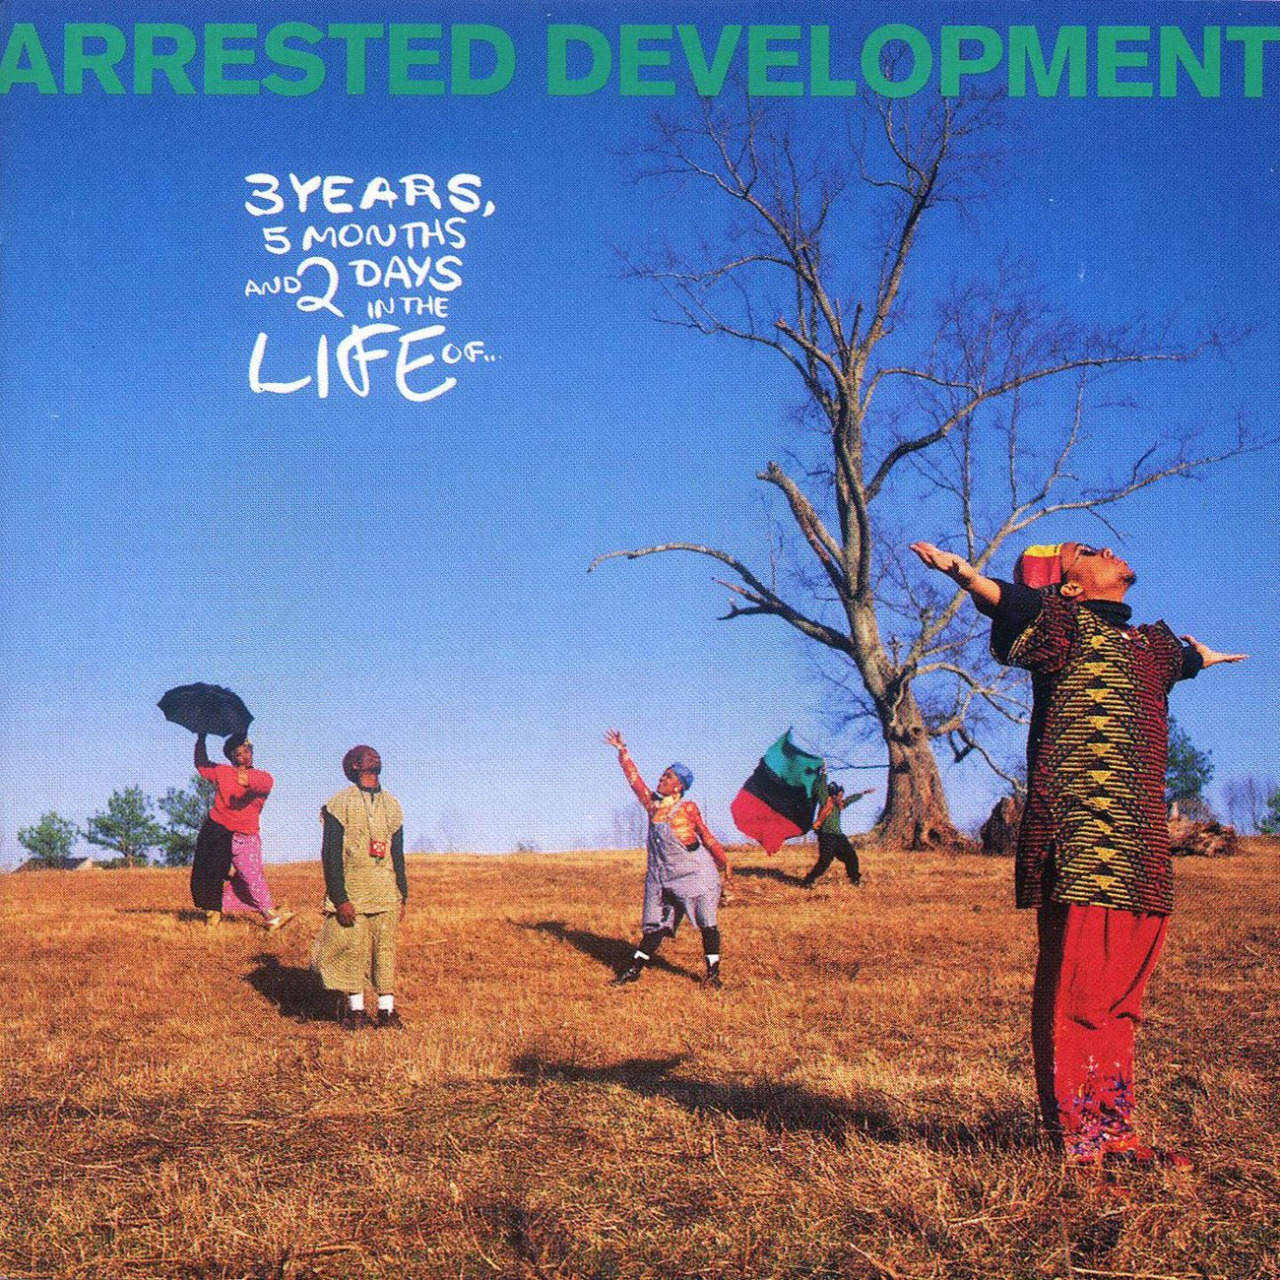 Today in Hip-Hop History: Arrested Development Dropped Their Debut Album ‘3 Years, 5 Months and 2 Days in The Life Of…’ 29 Years Ago